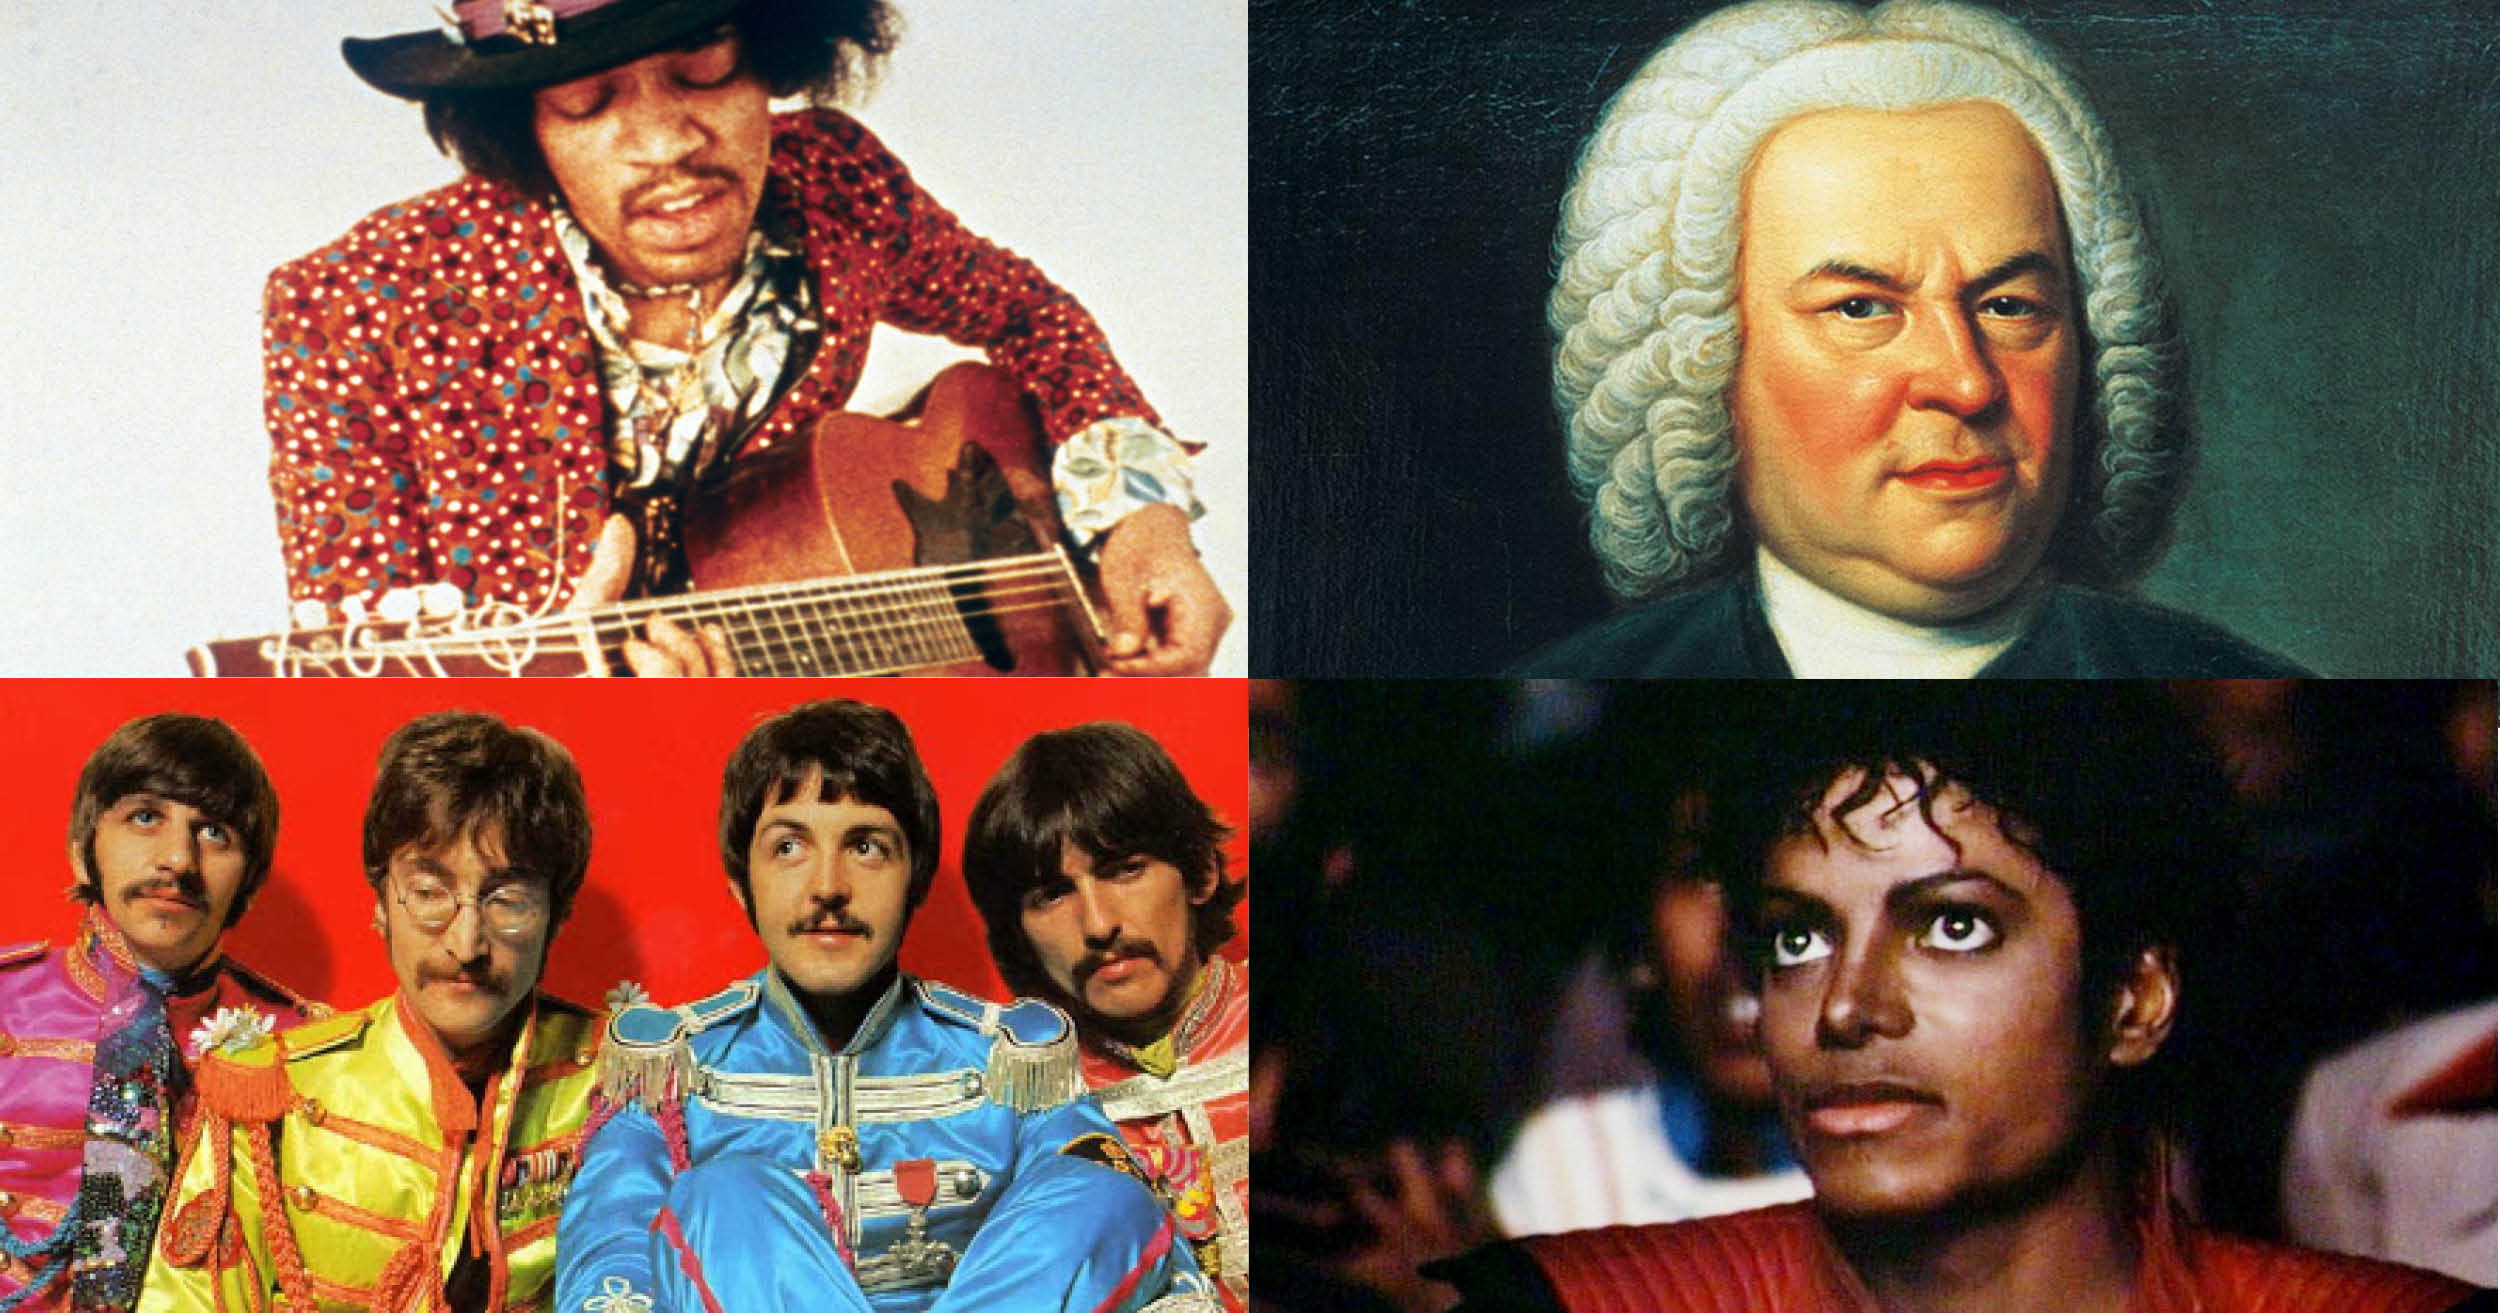 THE HISTORY OF MUSIC THROUGH 40 MASTERPIECES - Playing For Change